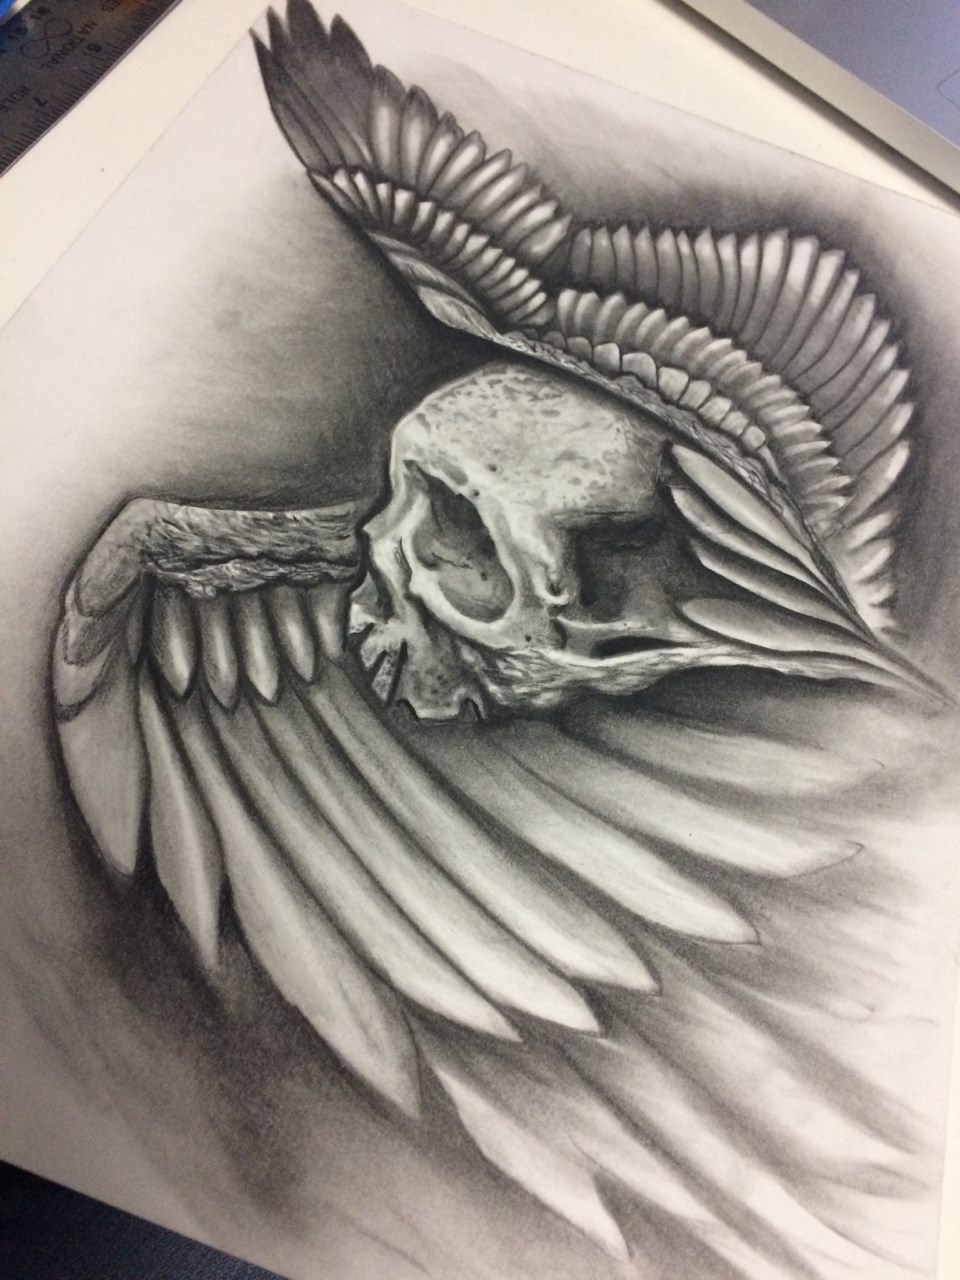 skull with wings